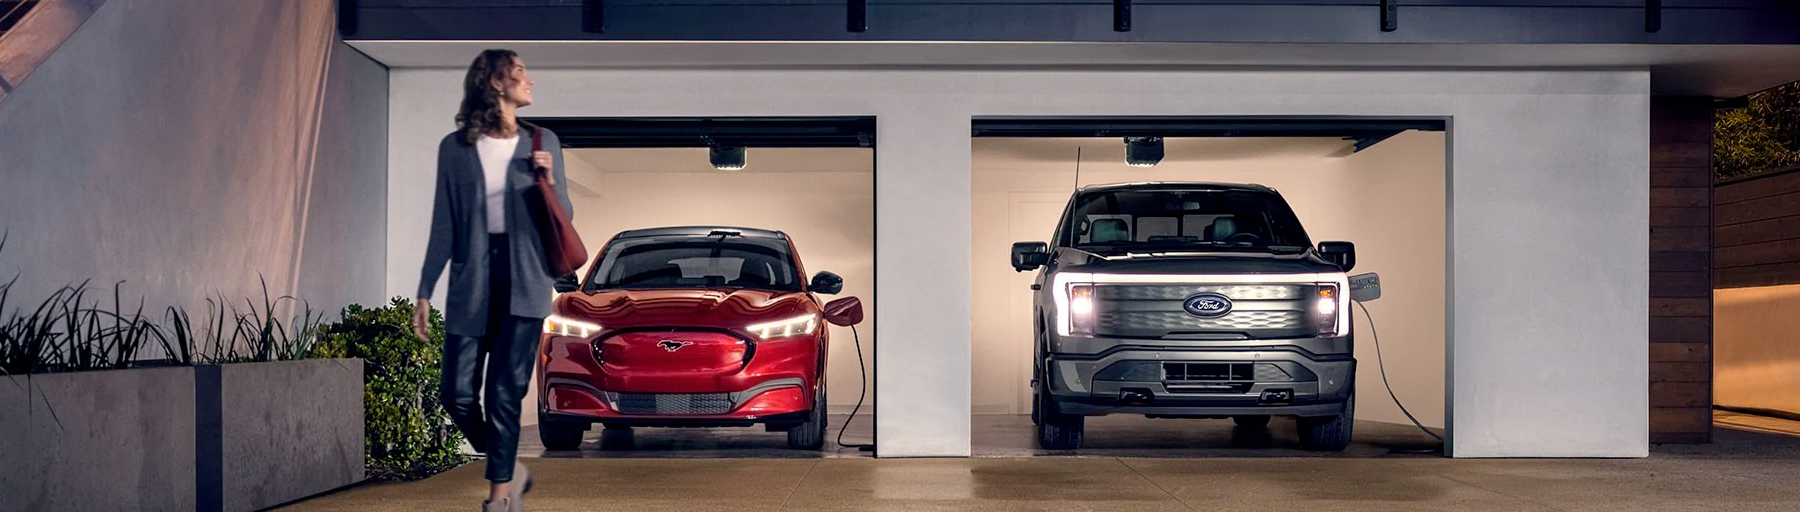 All-Electric Ford Vehicles at Stivers Ford of Birmingham